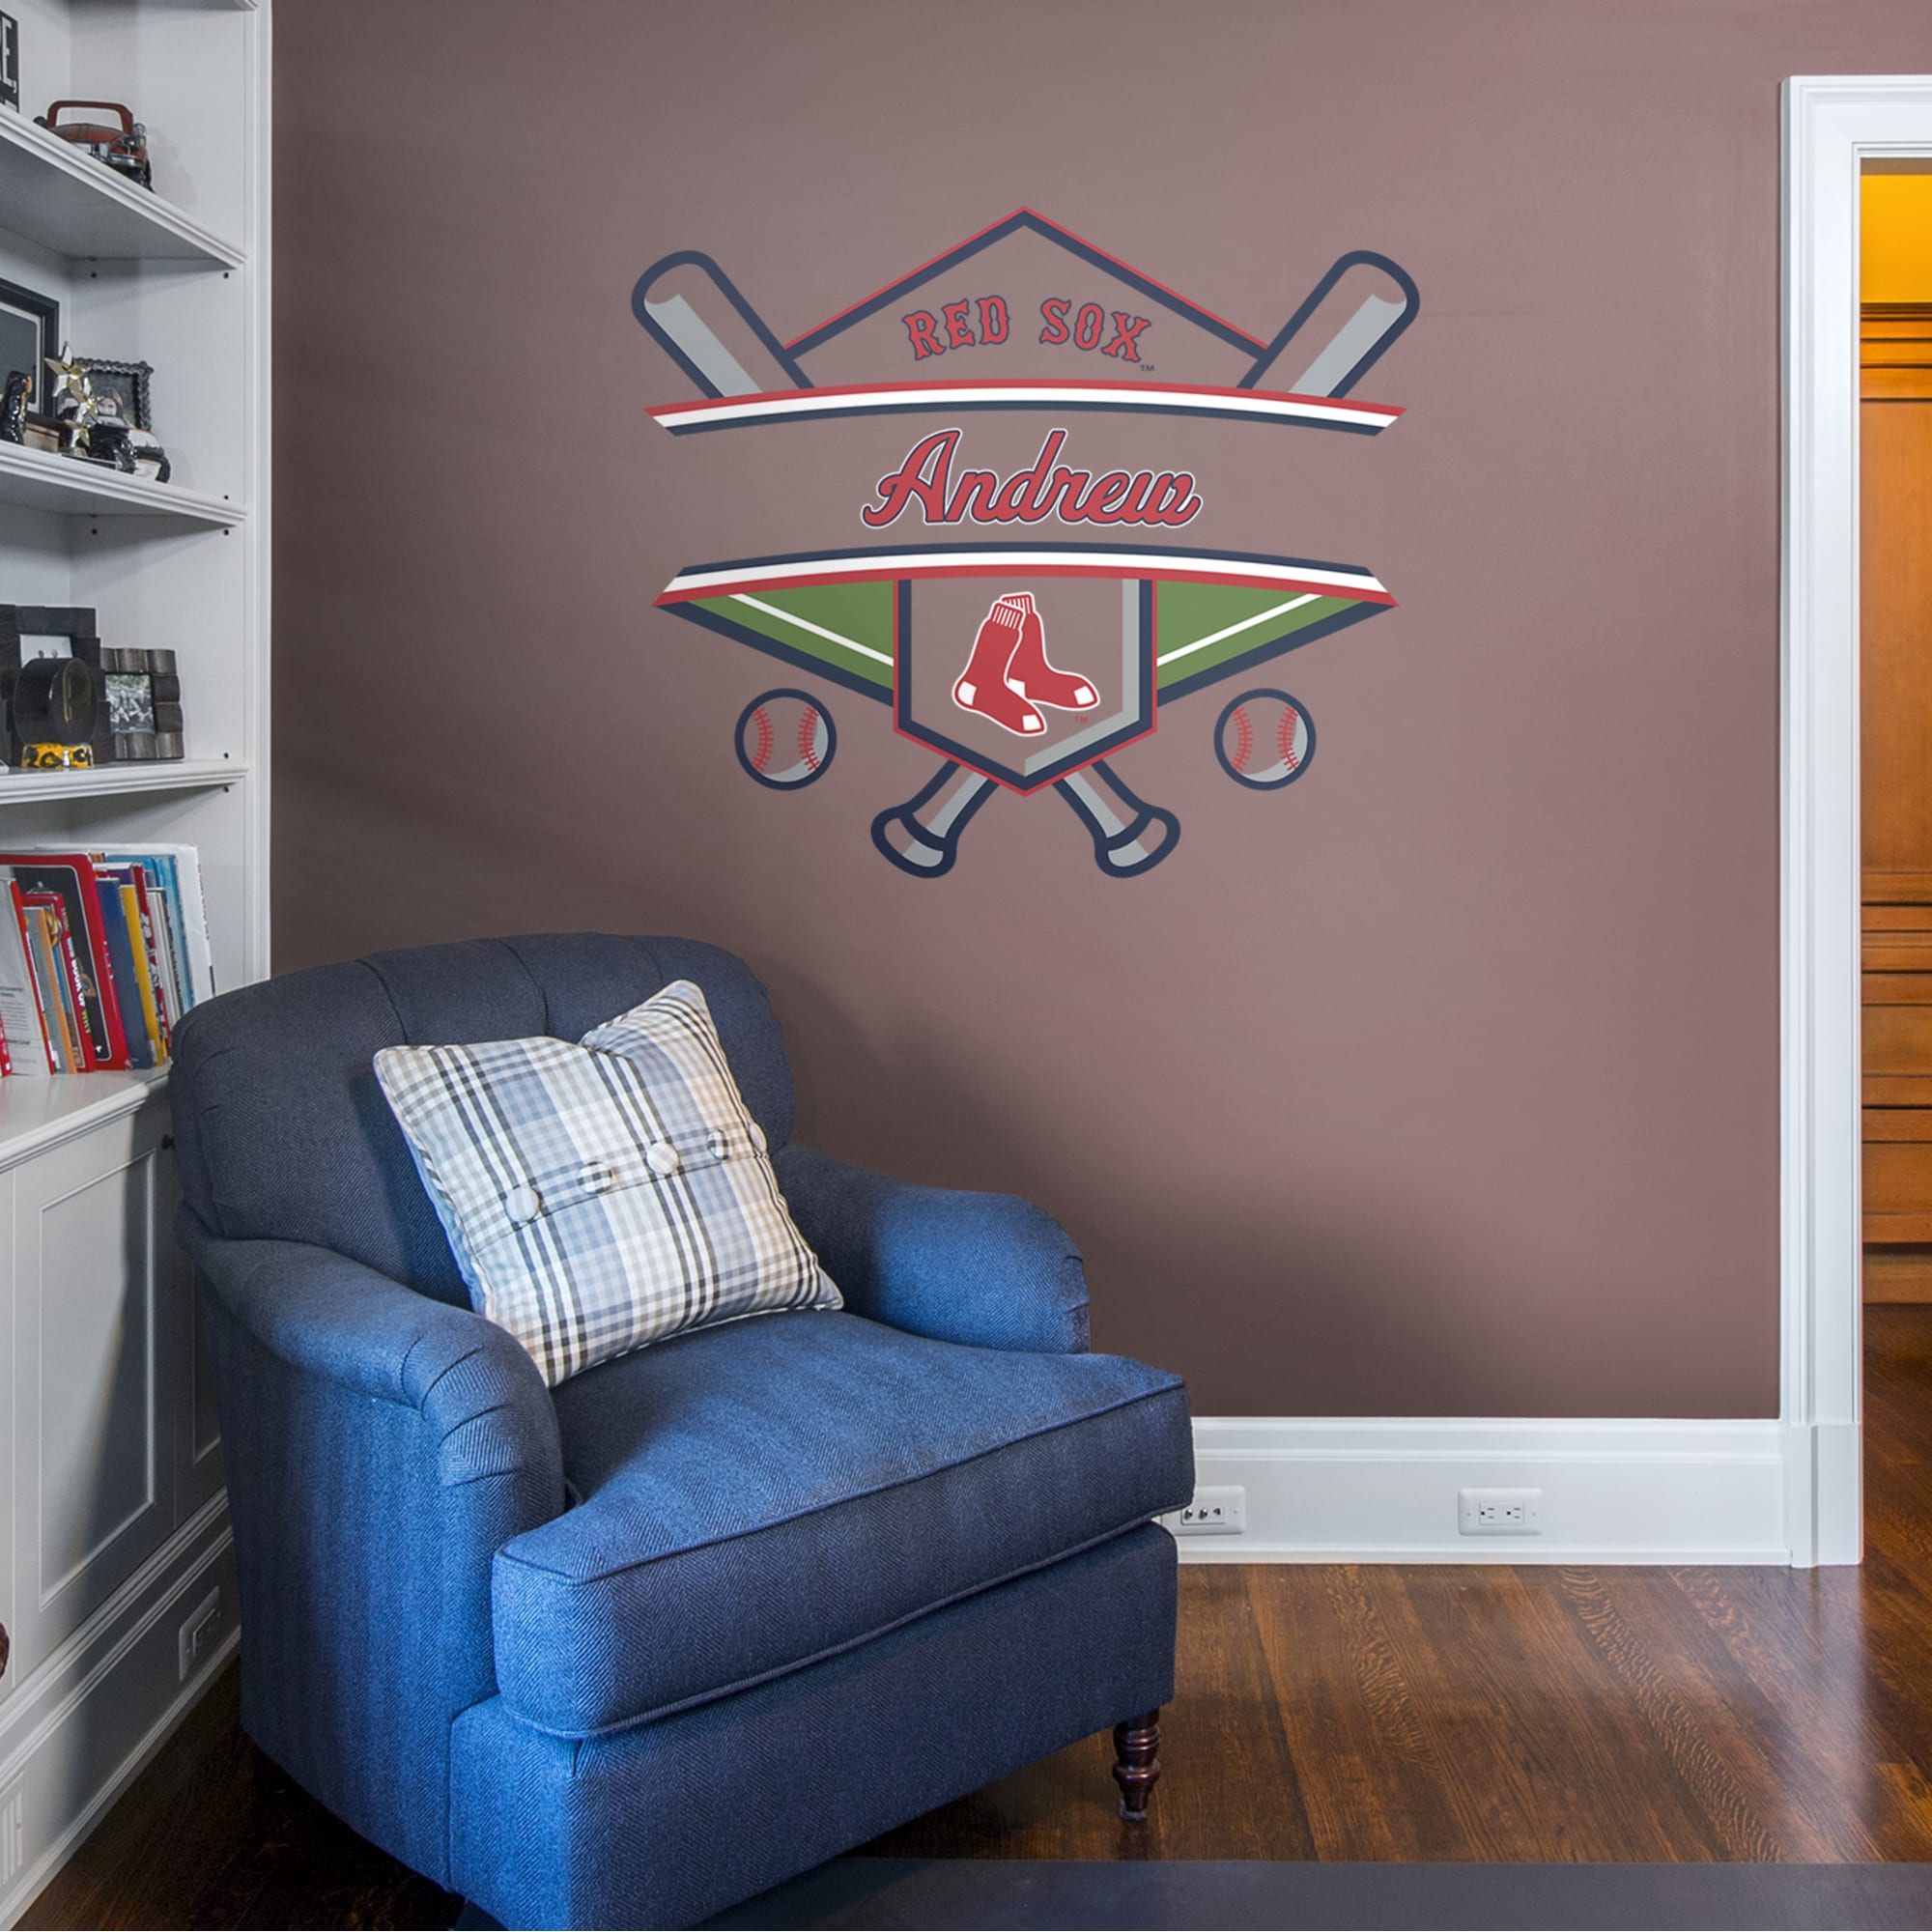 Boston Red Sox: Personalized Name - Officially Licensed MLB Transfer Decal 45.0"W x 39.0"H by Fathead | Vinyl